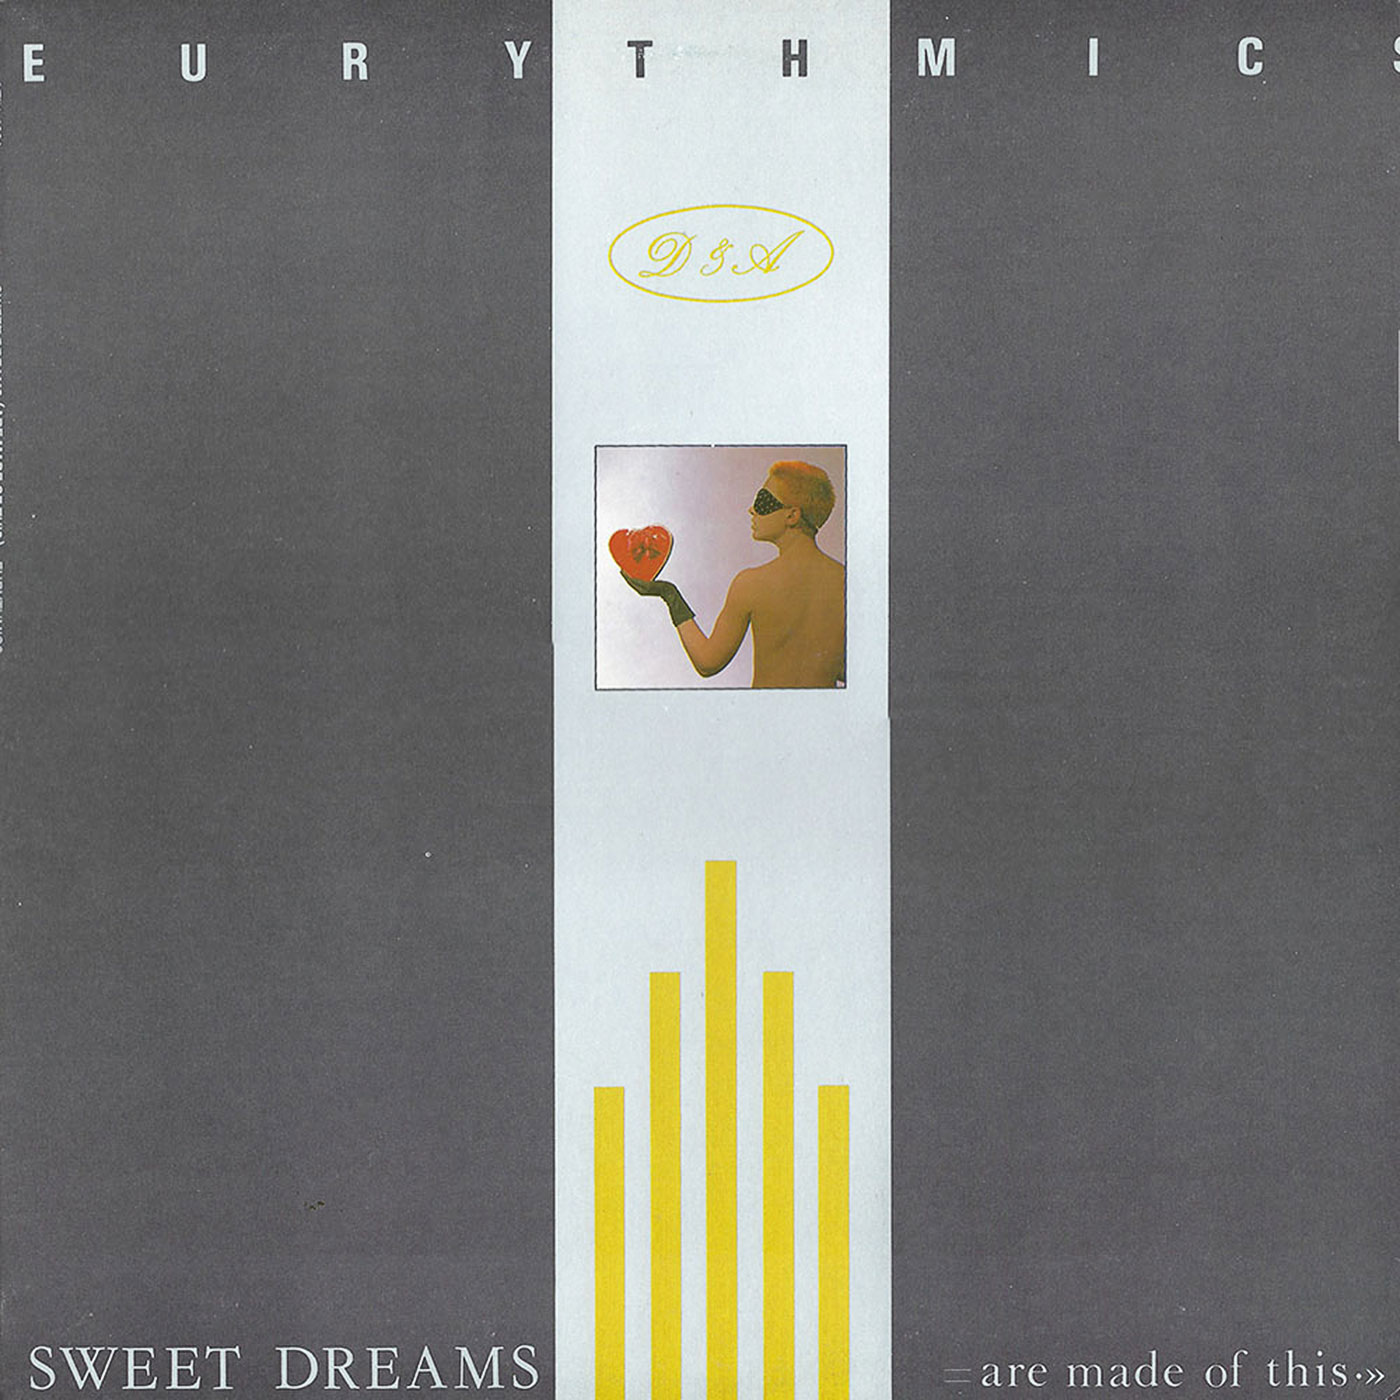 527 Eurythmics – Sweet Dreams (Are Made of This)